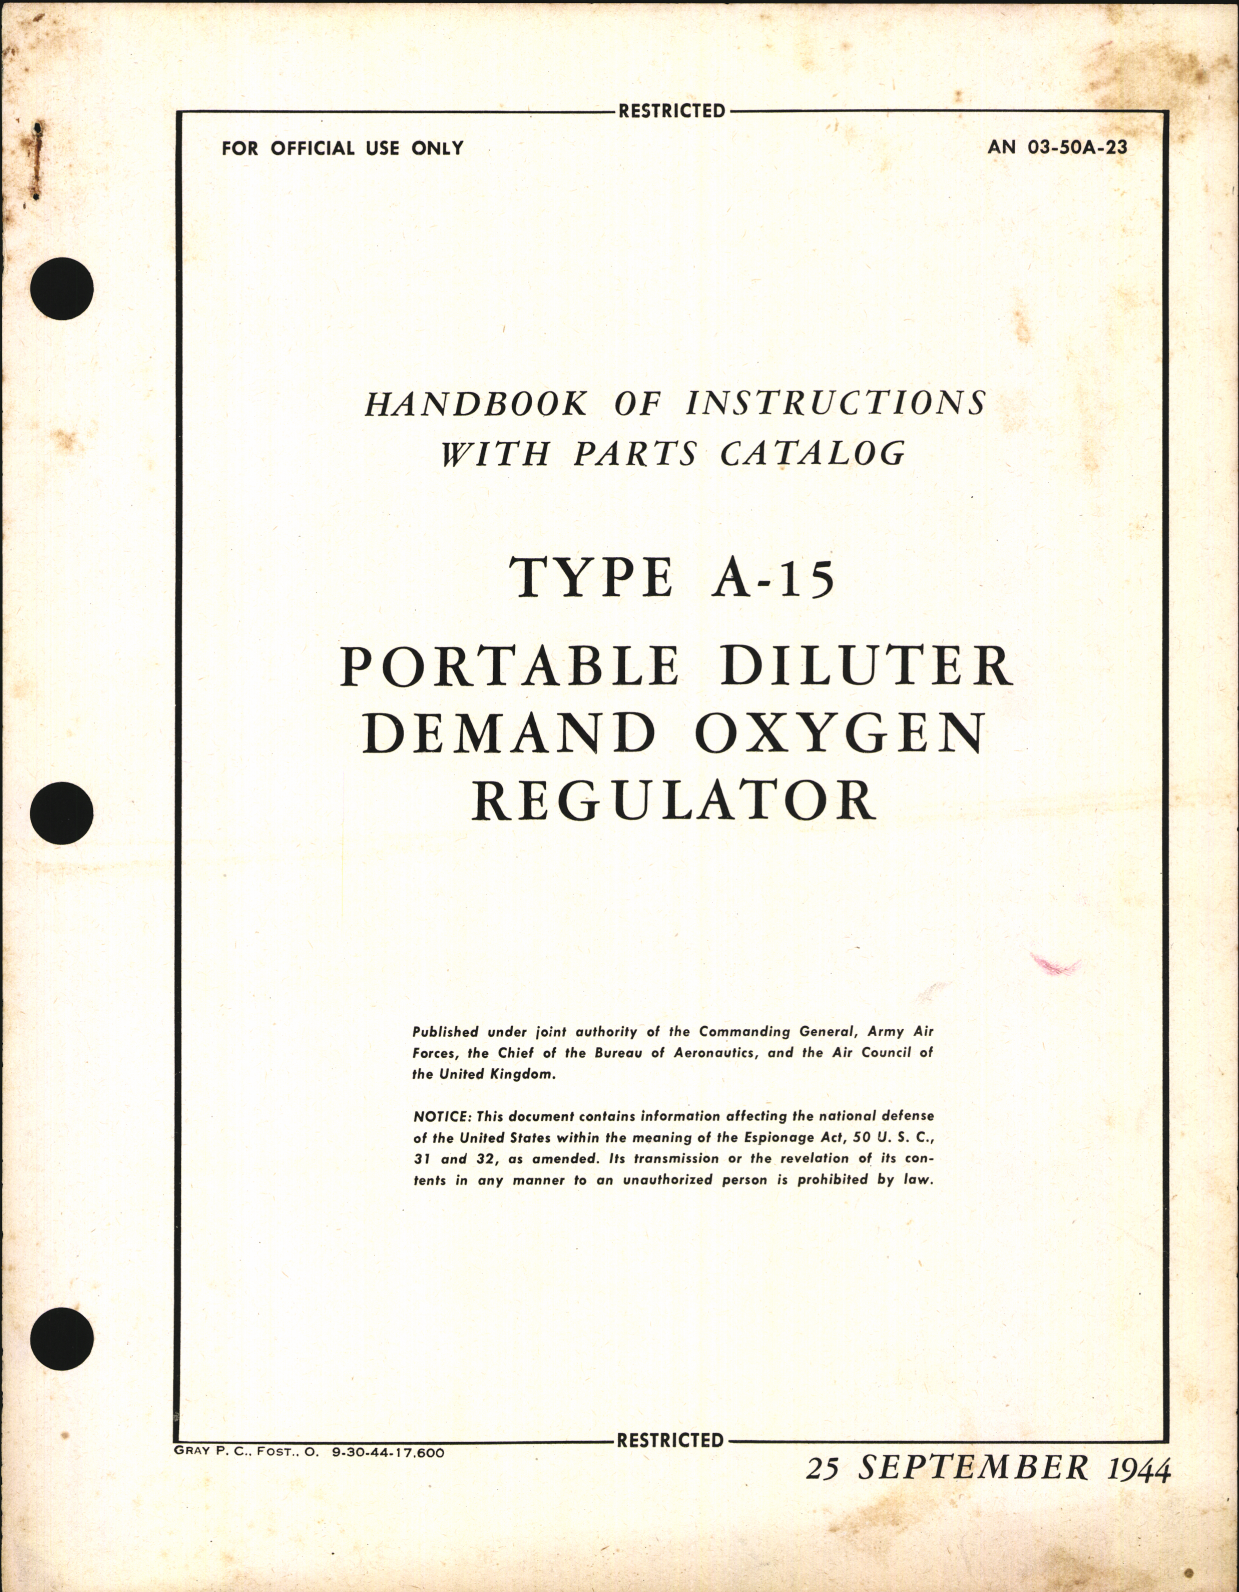 Sample page 1 from AirCorps Library document: Handbook of Instructions with Parts Catalog for Type A-15 Portable Diluter Demand Oxygen Regulator